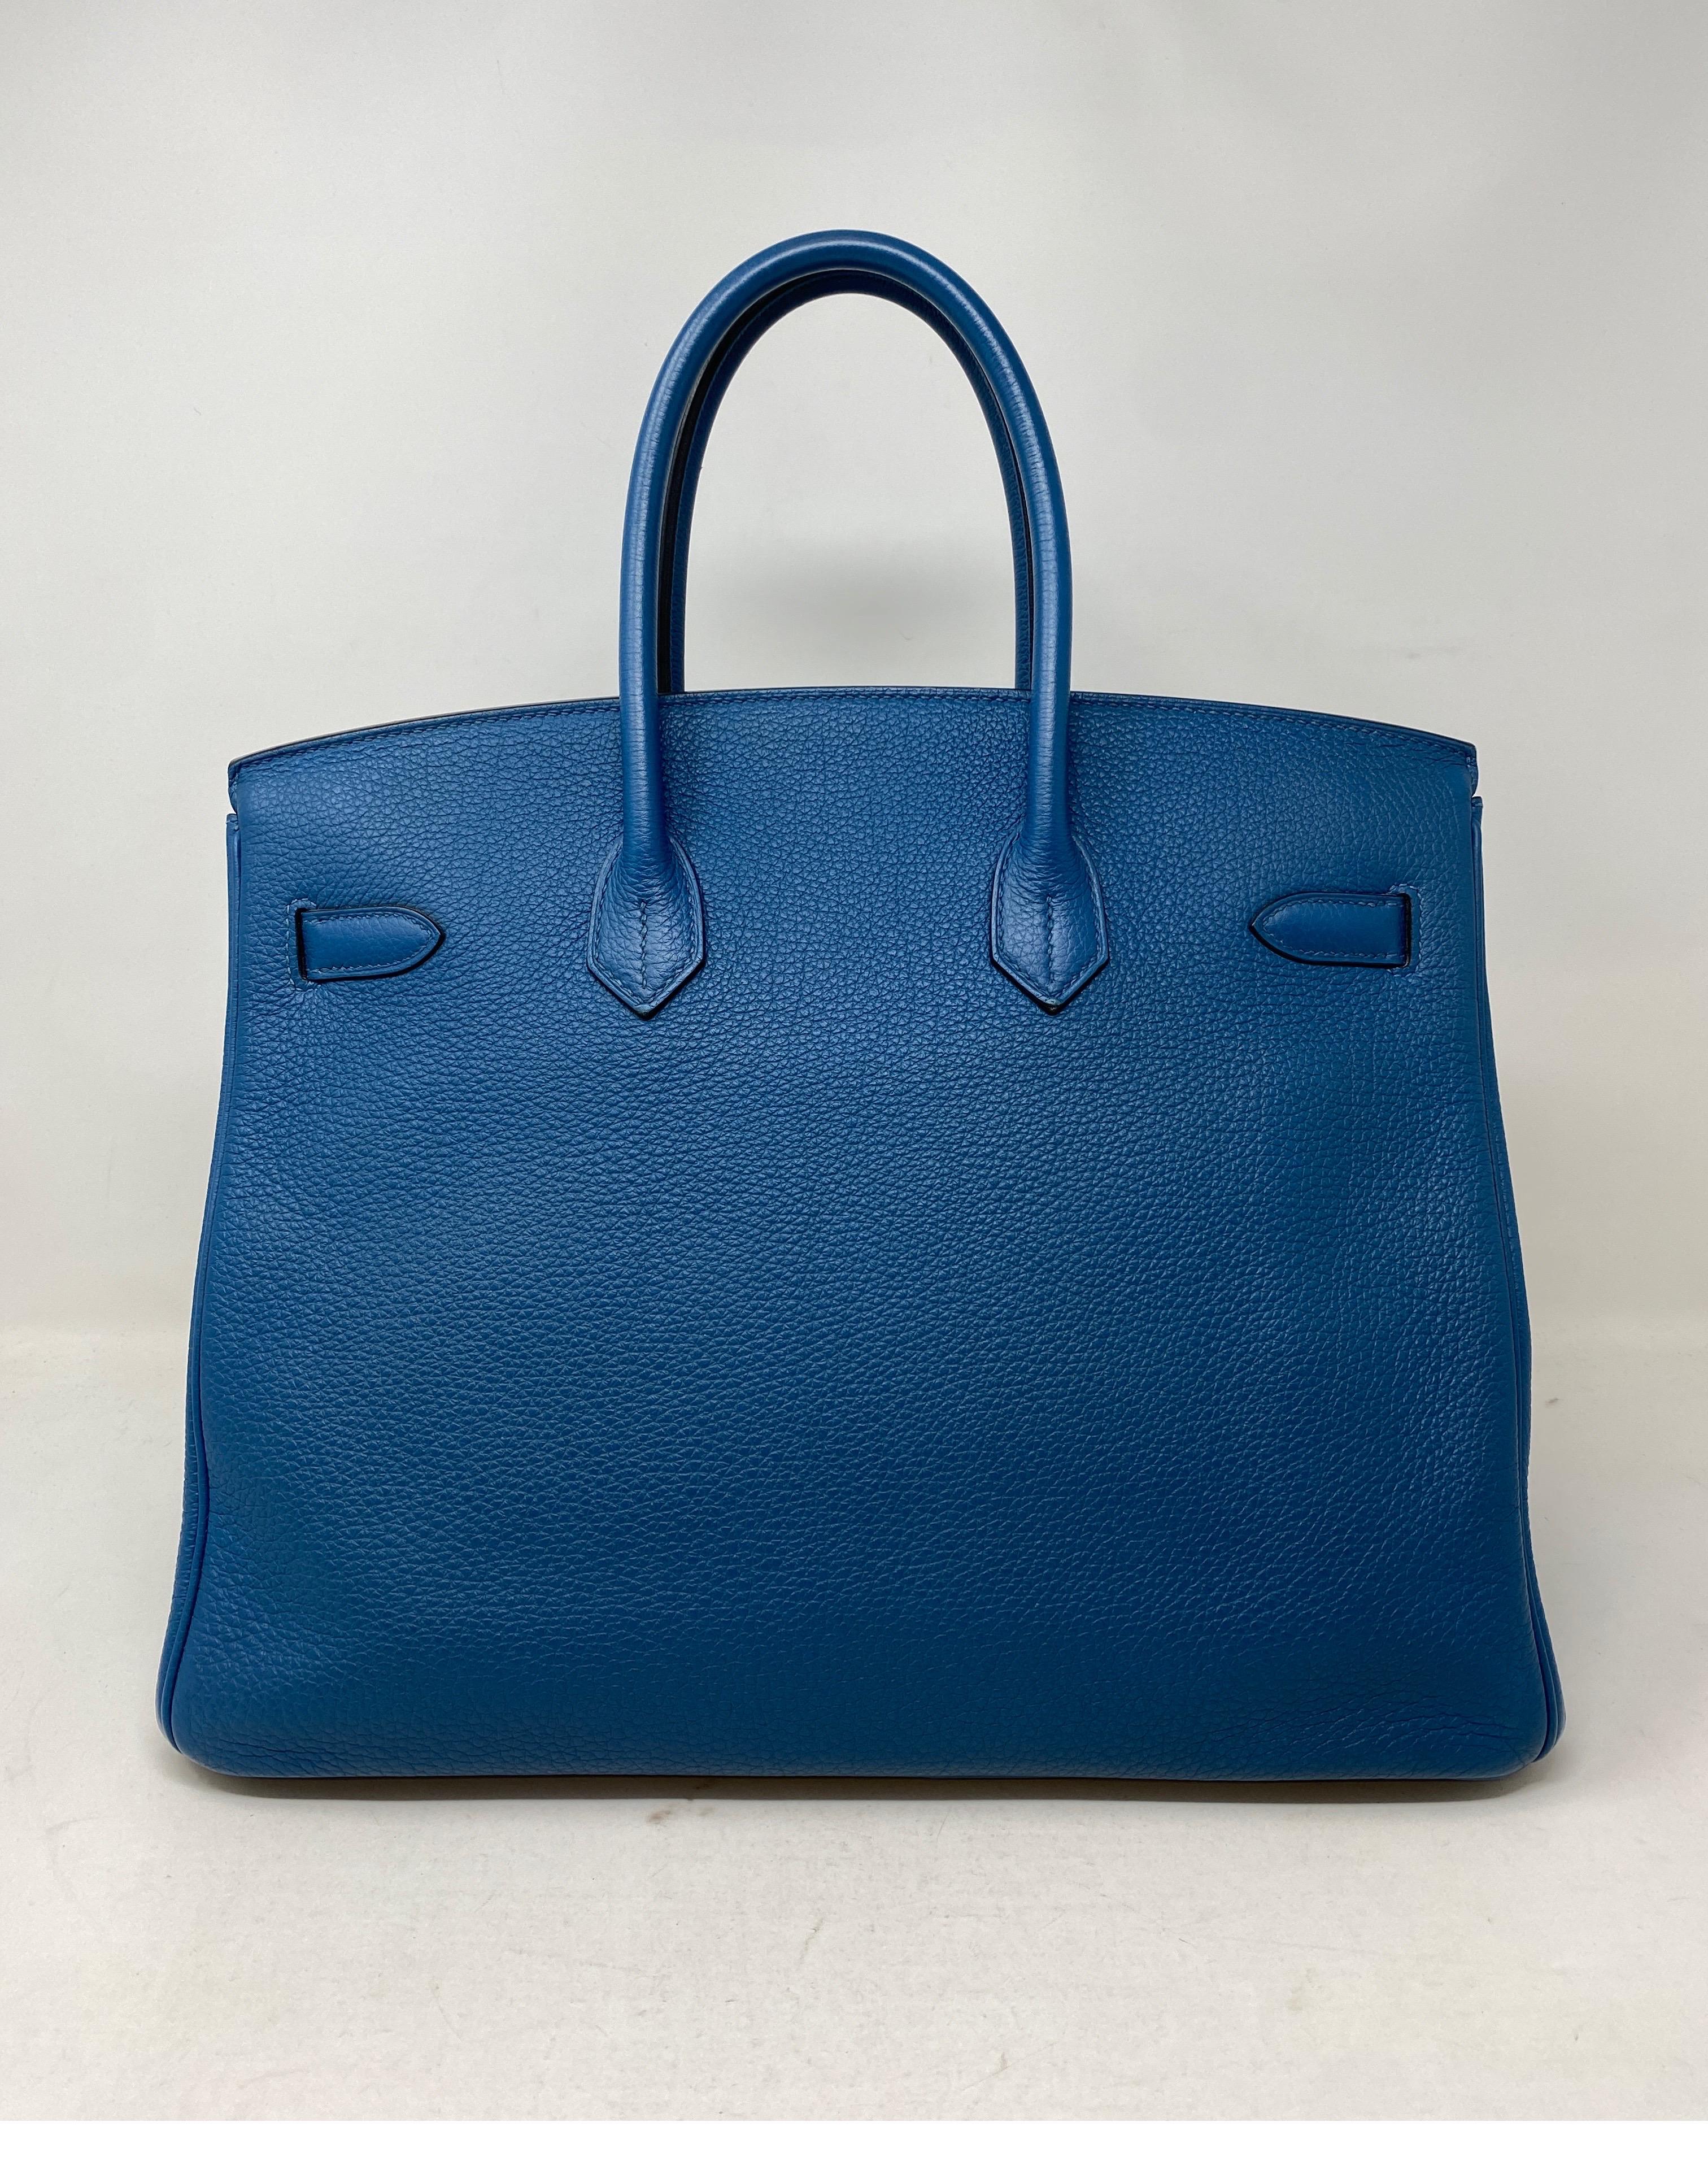 Hermes Blue Covert Birkin Bag. Excellent condtion. Gold hardware. Rare blue color. Size 35 classic size Birkin bag. Includes clochette, lock, keys, and dust cover. Guaranteed authentic. 